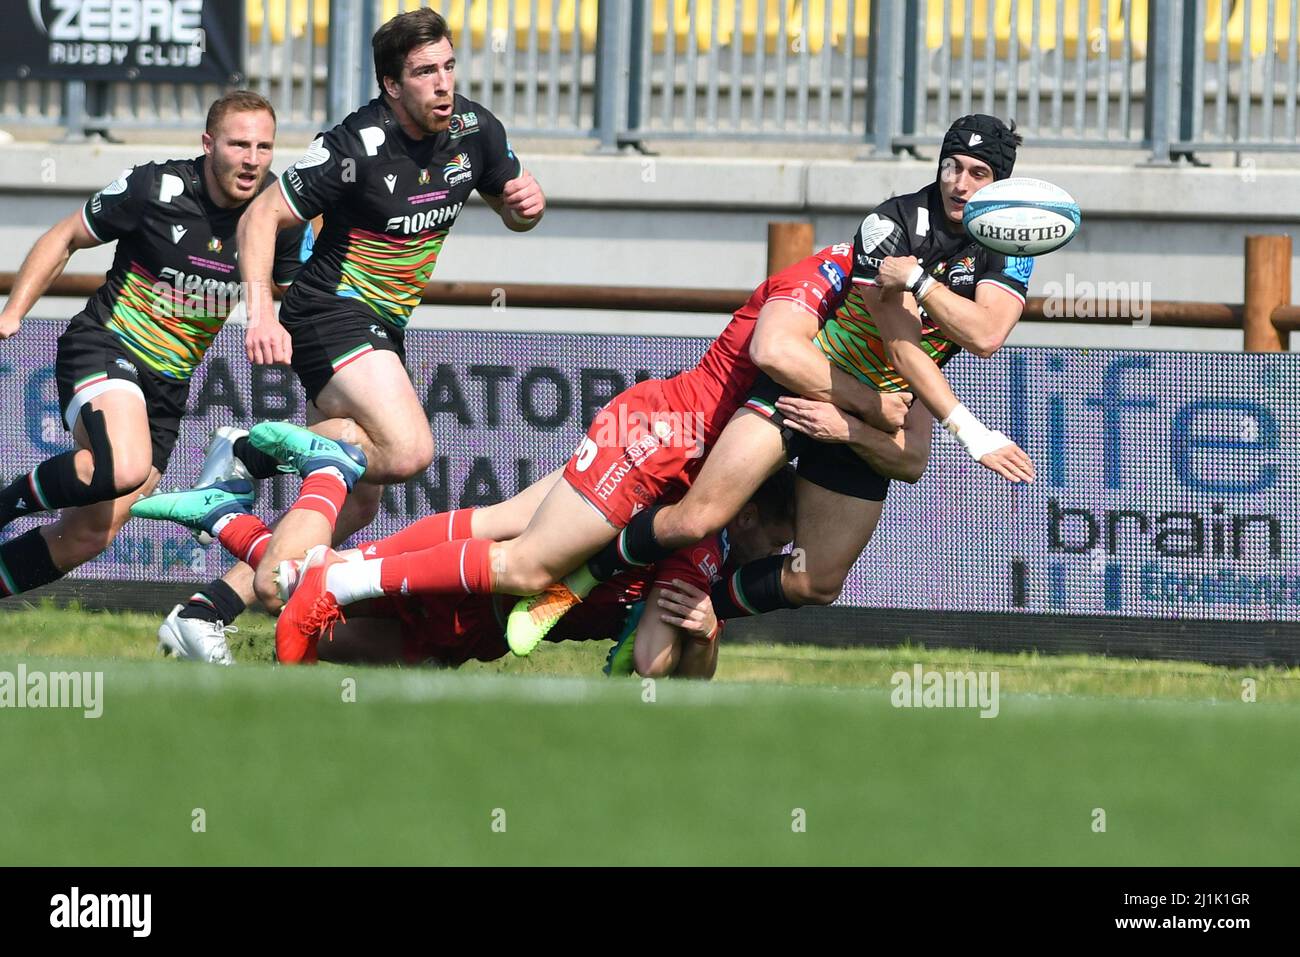 Parma, Italia. 26th Mar, 2022. simone gesi (zebre) durante Zebre Rugby Club vs Scarlets, United Rugby Championship match a Parma, Italy, March 26 2022 Credit: Independent Photo Agency/Alamy Live News Foto Stock